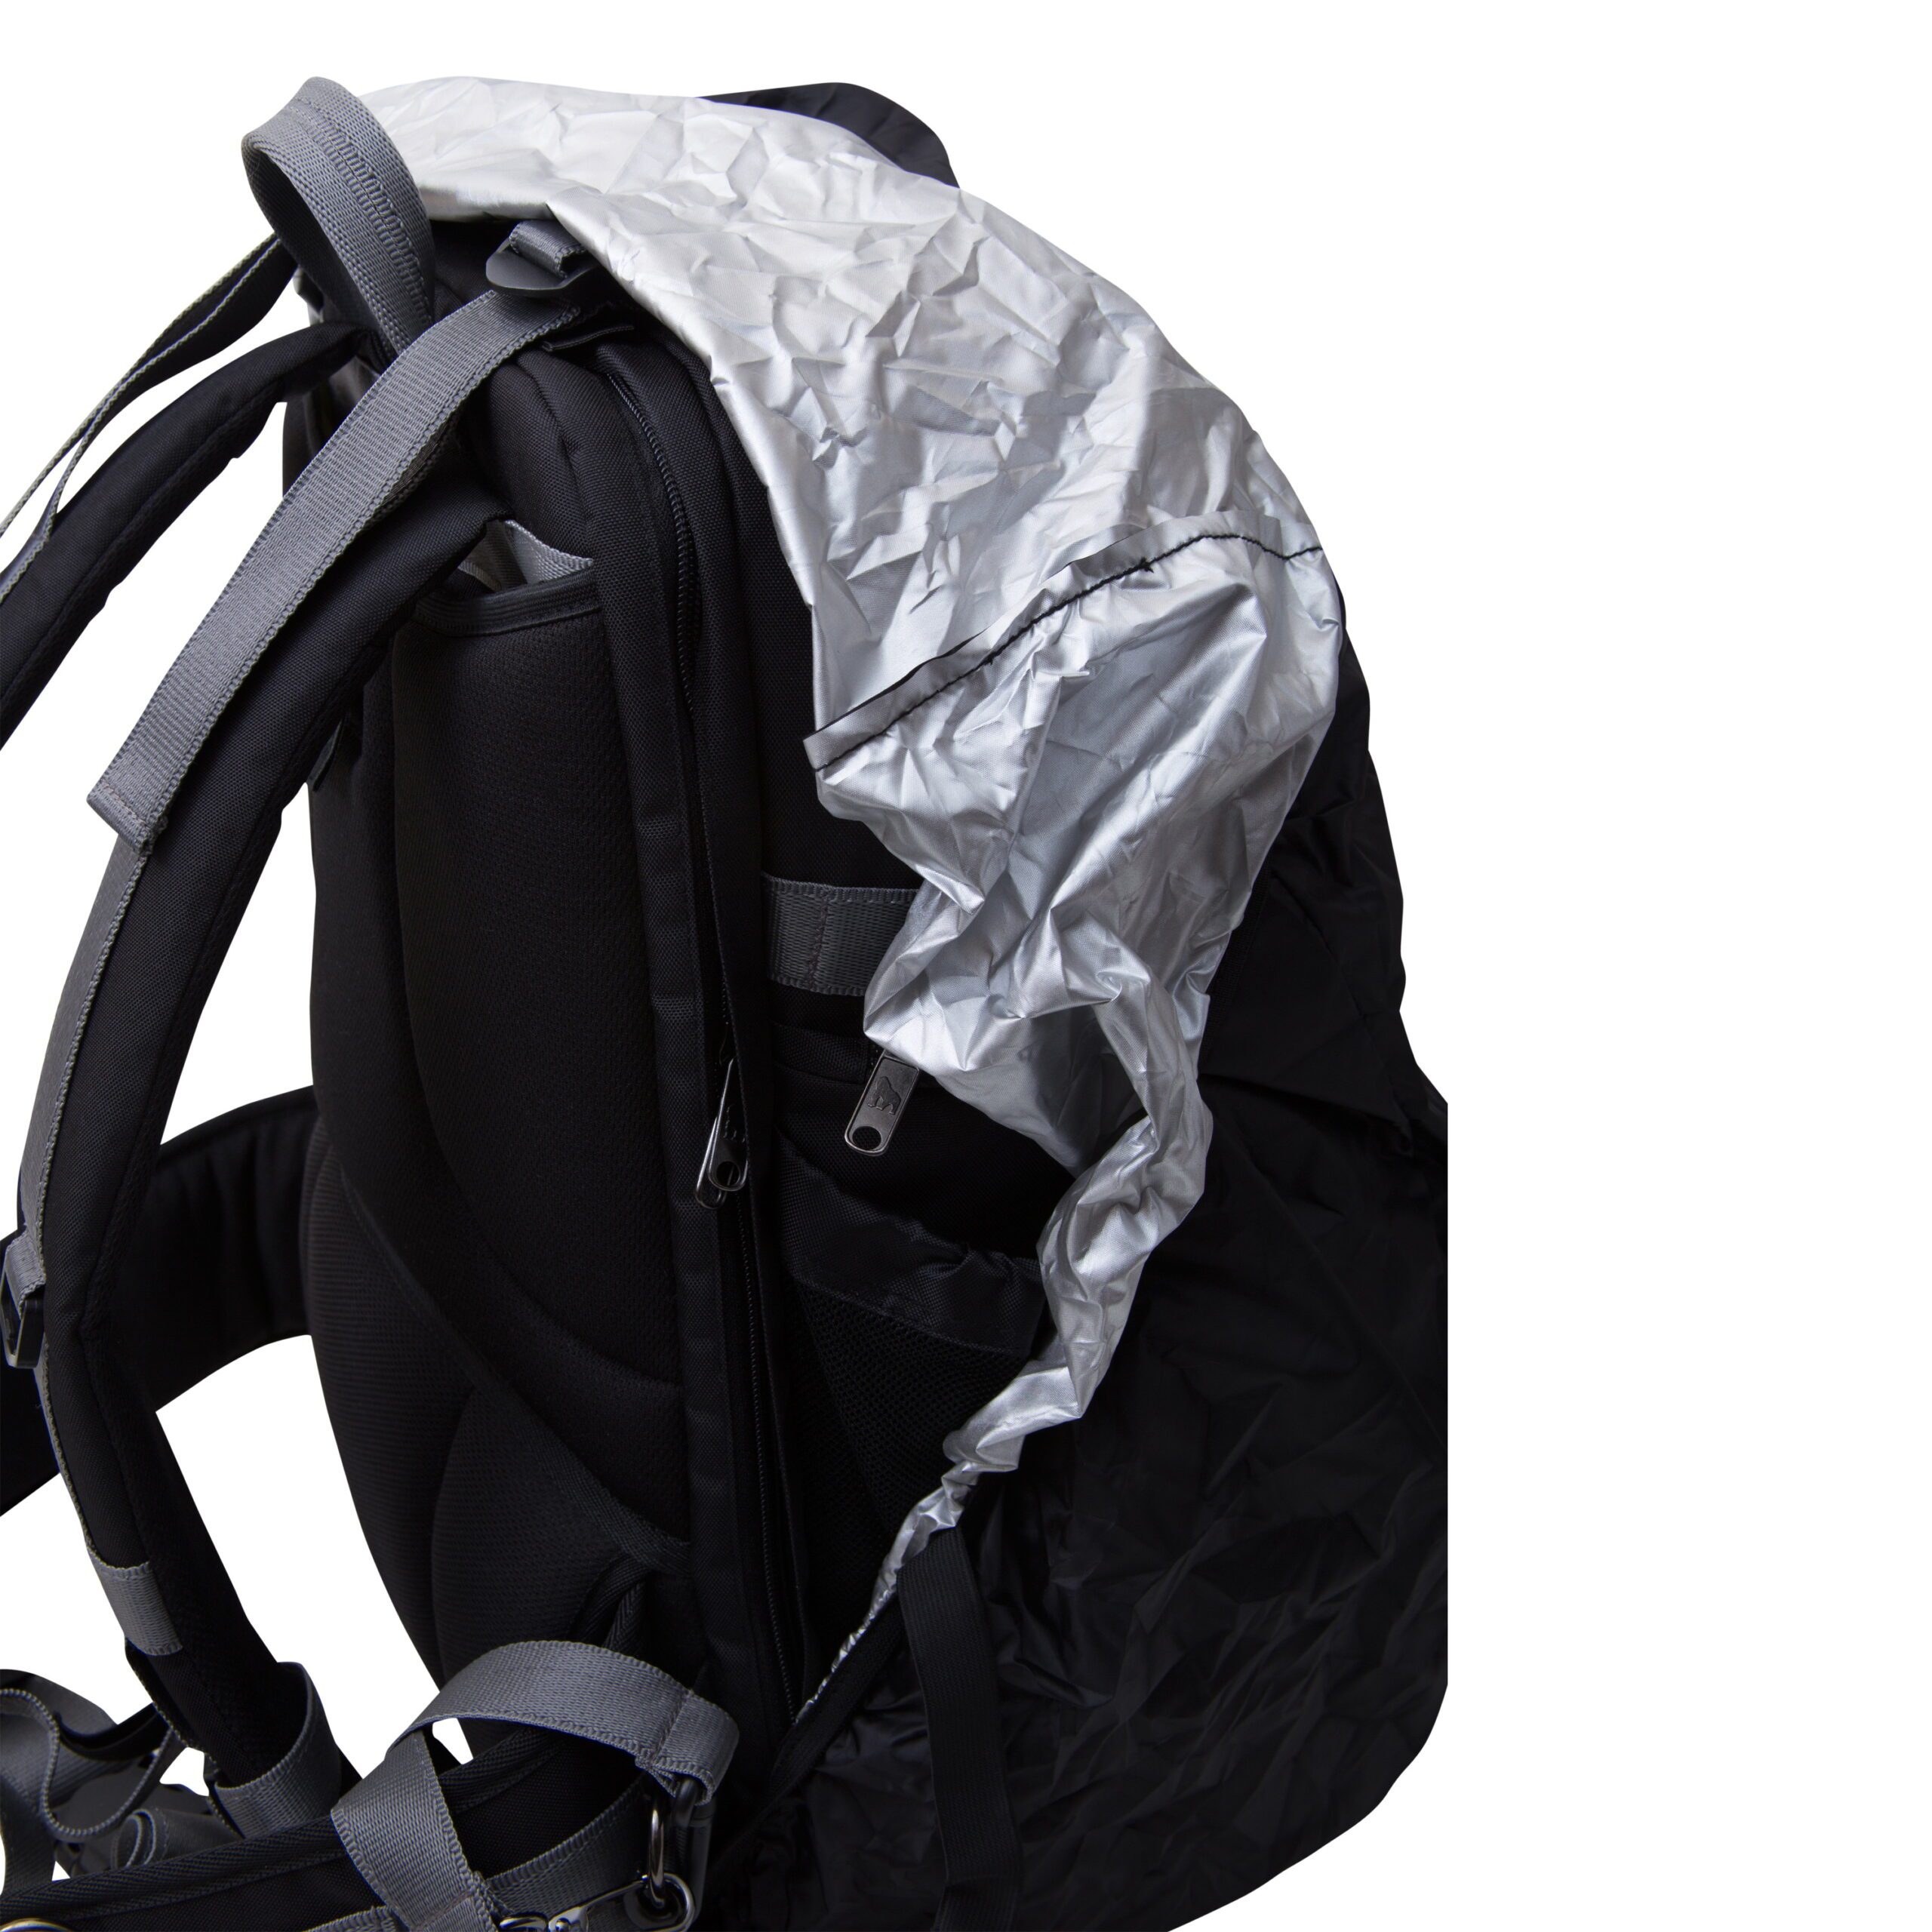 ACPRO3500 - Ape Case offers a large capacity backpack without the